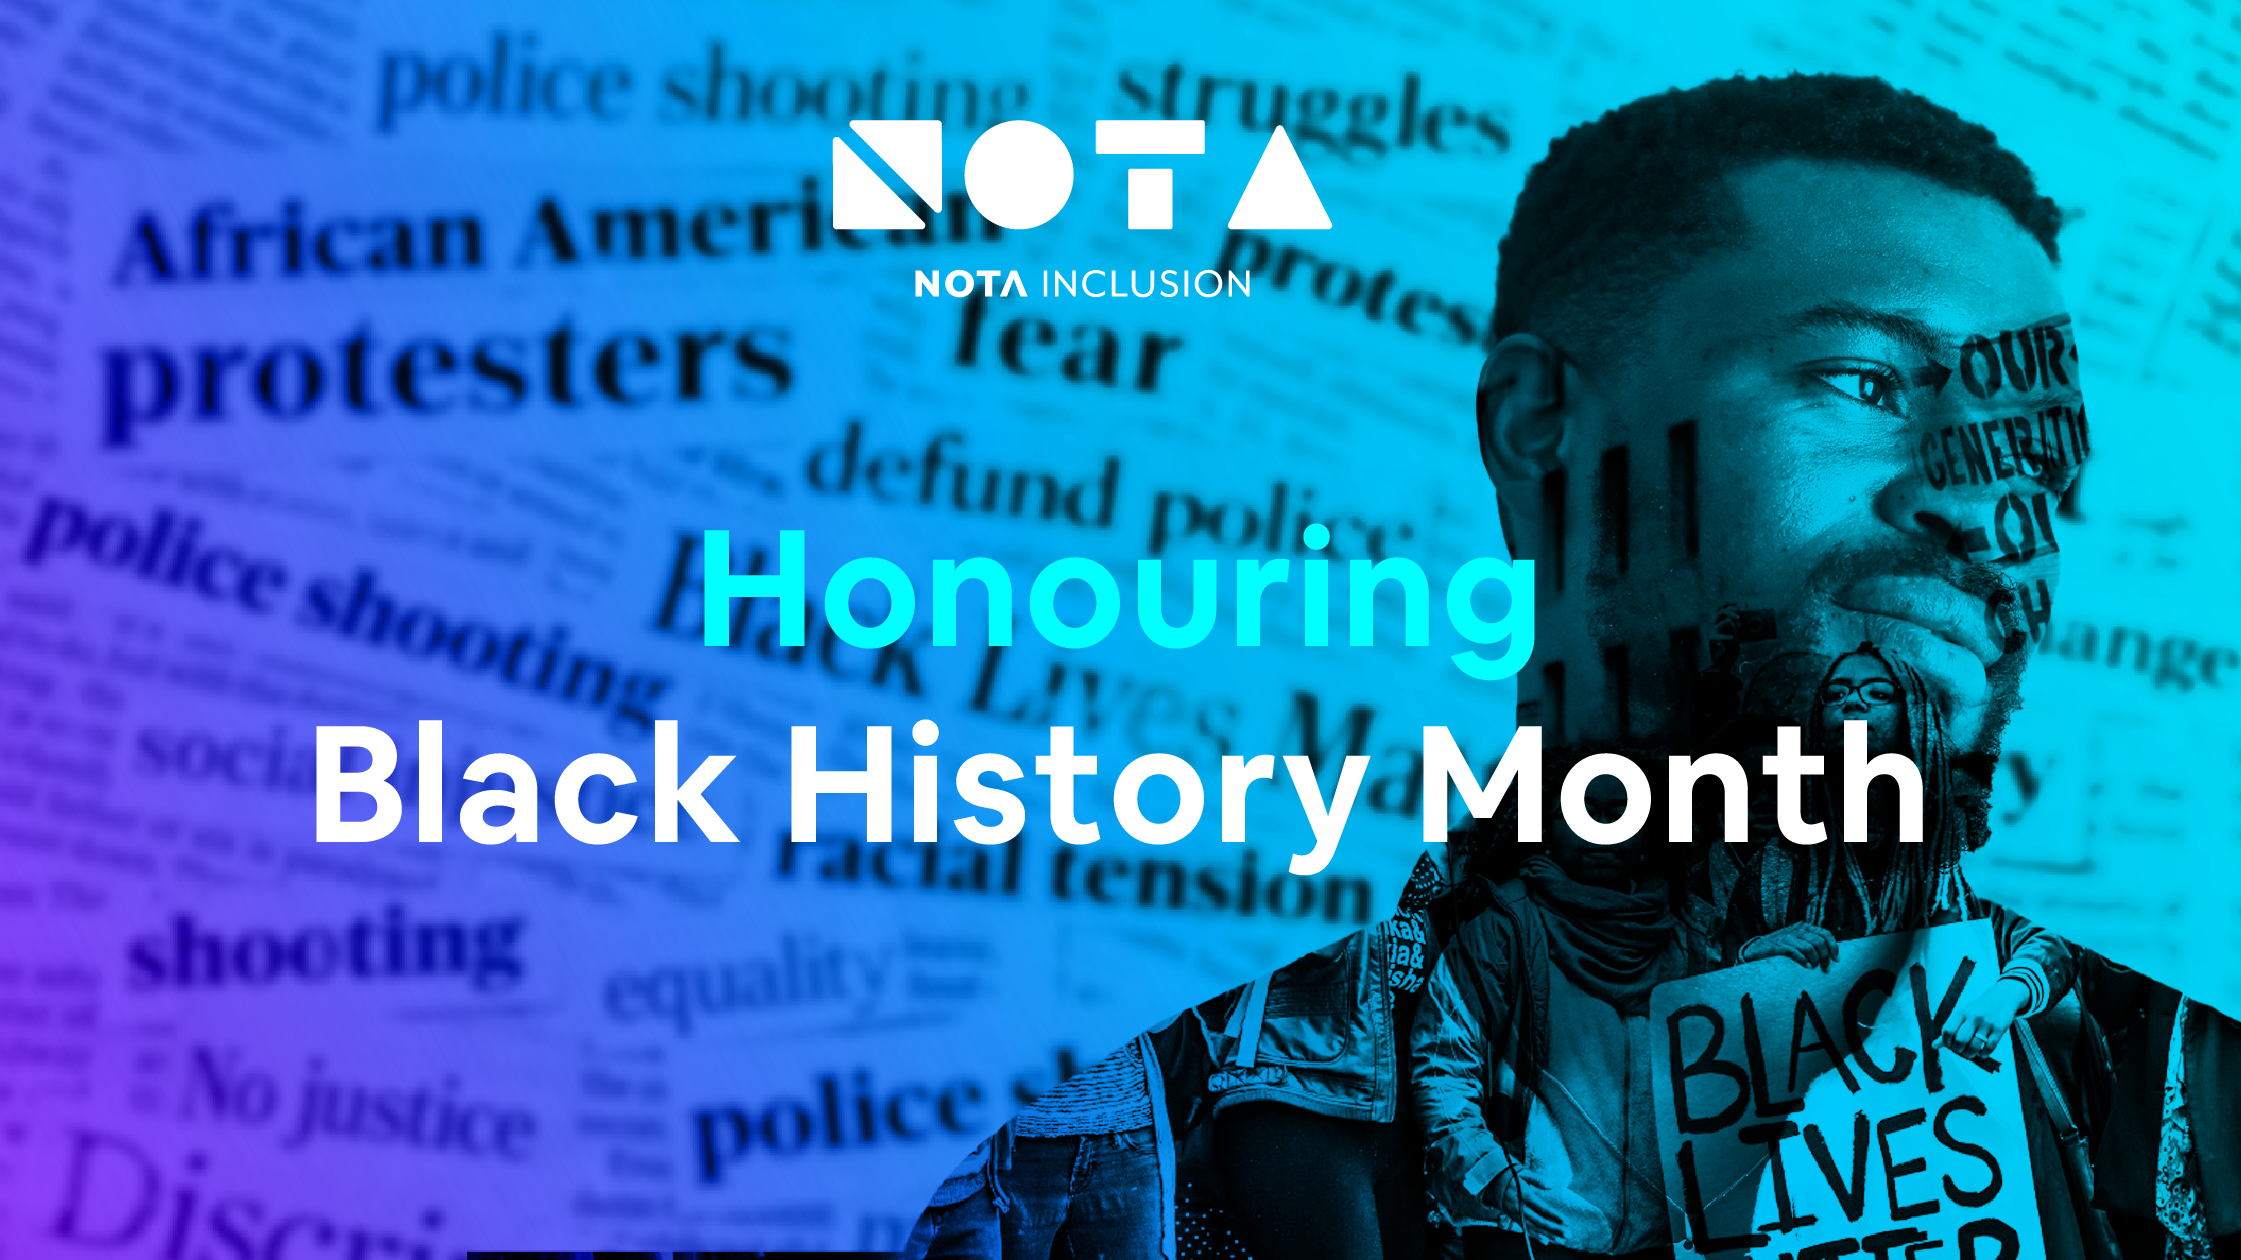 HONOURING BLACK HISTORY MONTH